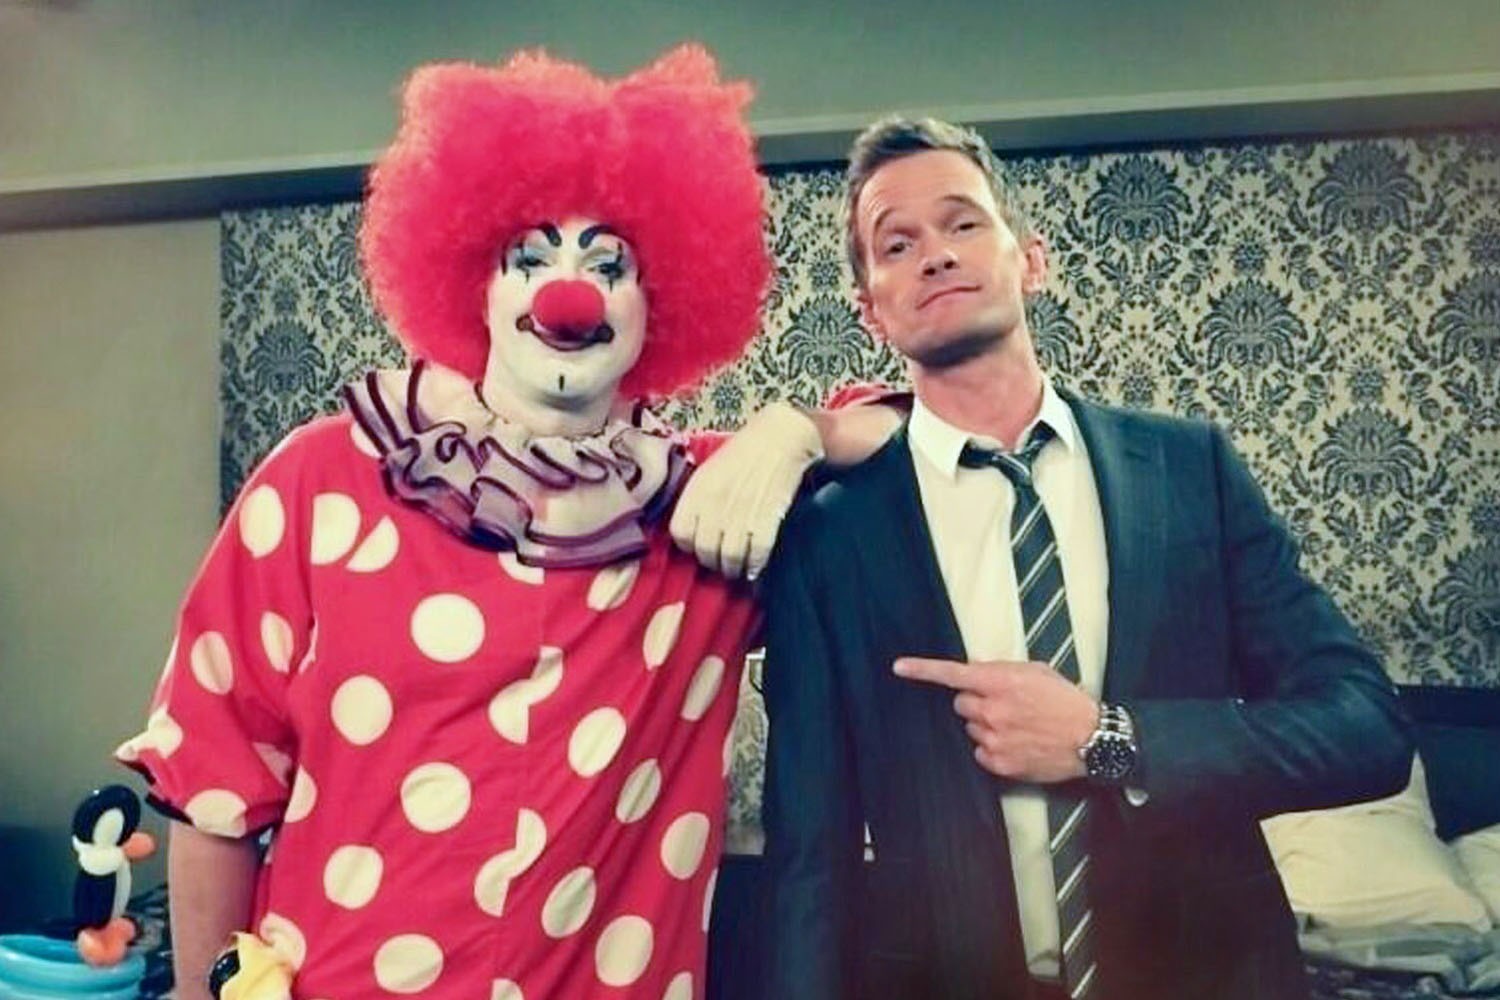 NPH and WZ, BTS on HIMYM. The laughs were as plentiful as the acronyms